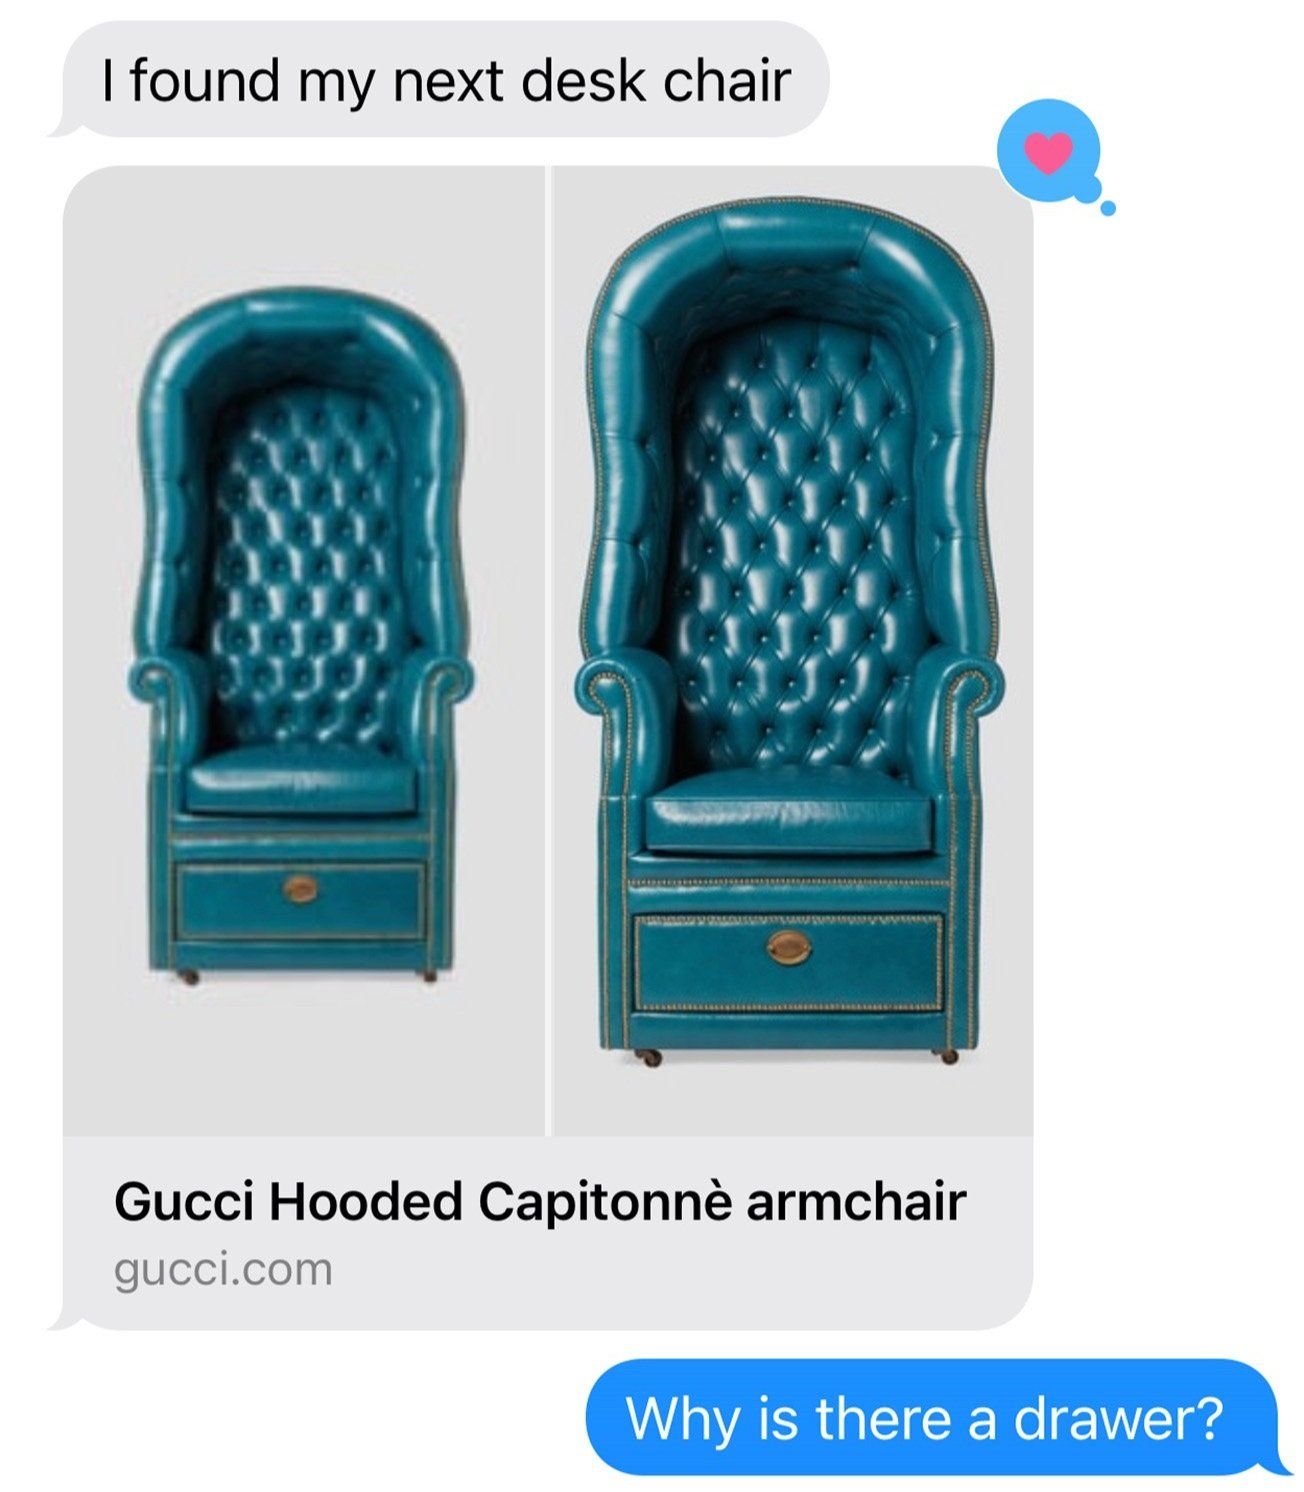 Screenshot of text message exchange I had with my husband Jeff that reads, Jeff: “I found my next desk chair.” Link to Gucci Hooded Capitonnè armchair with picture of teal green, hooded armchair with a drawer at the base. Me: “Why is there a drawer?”